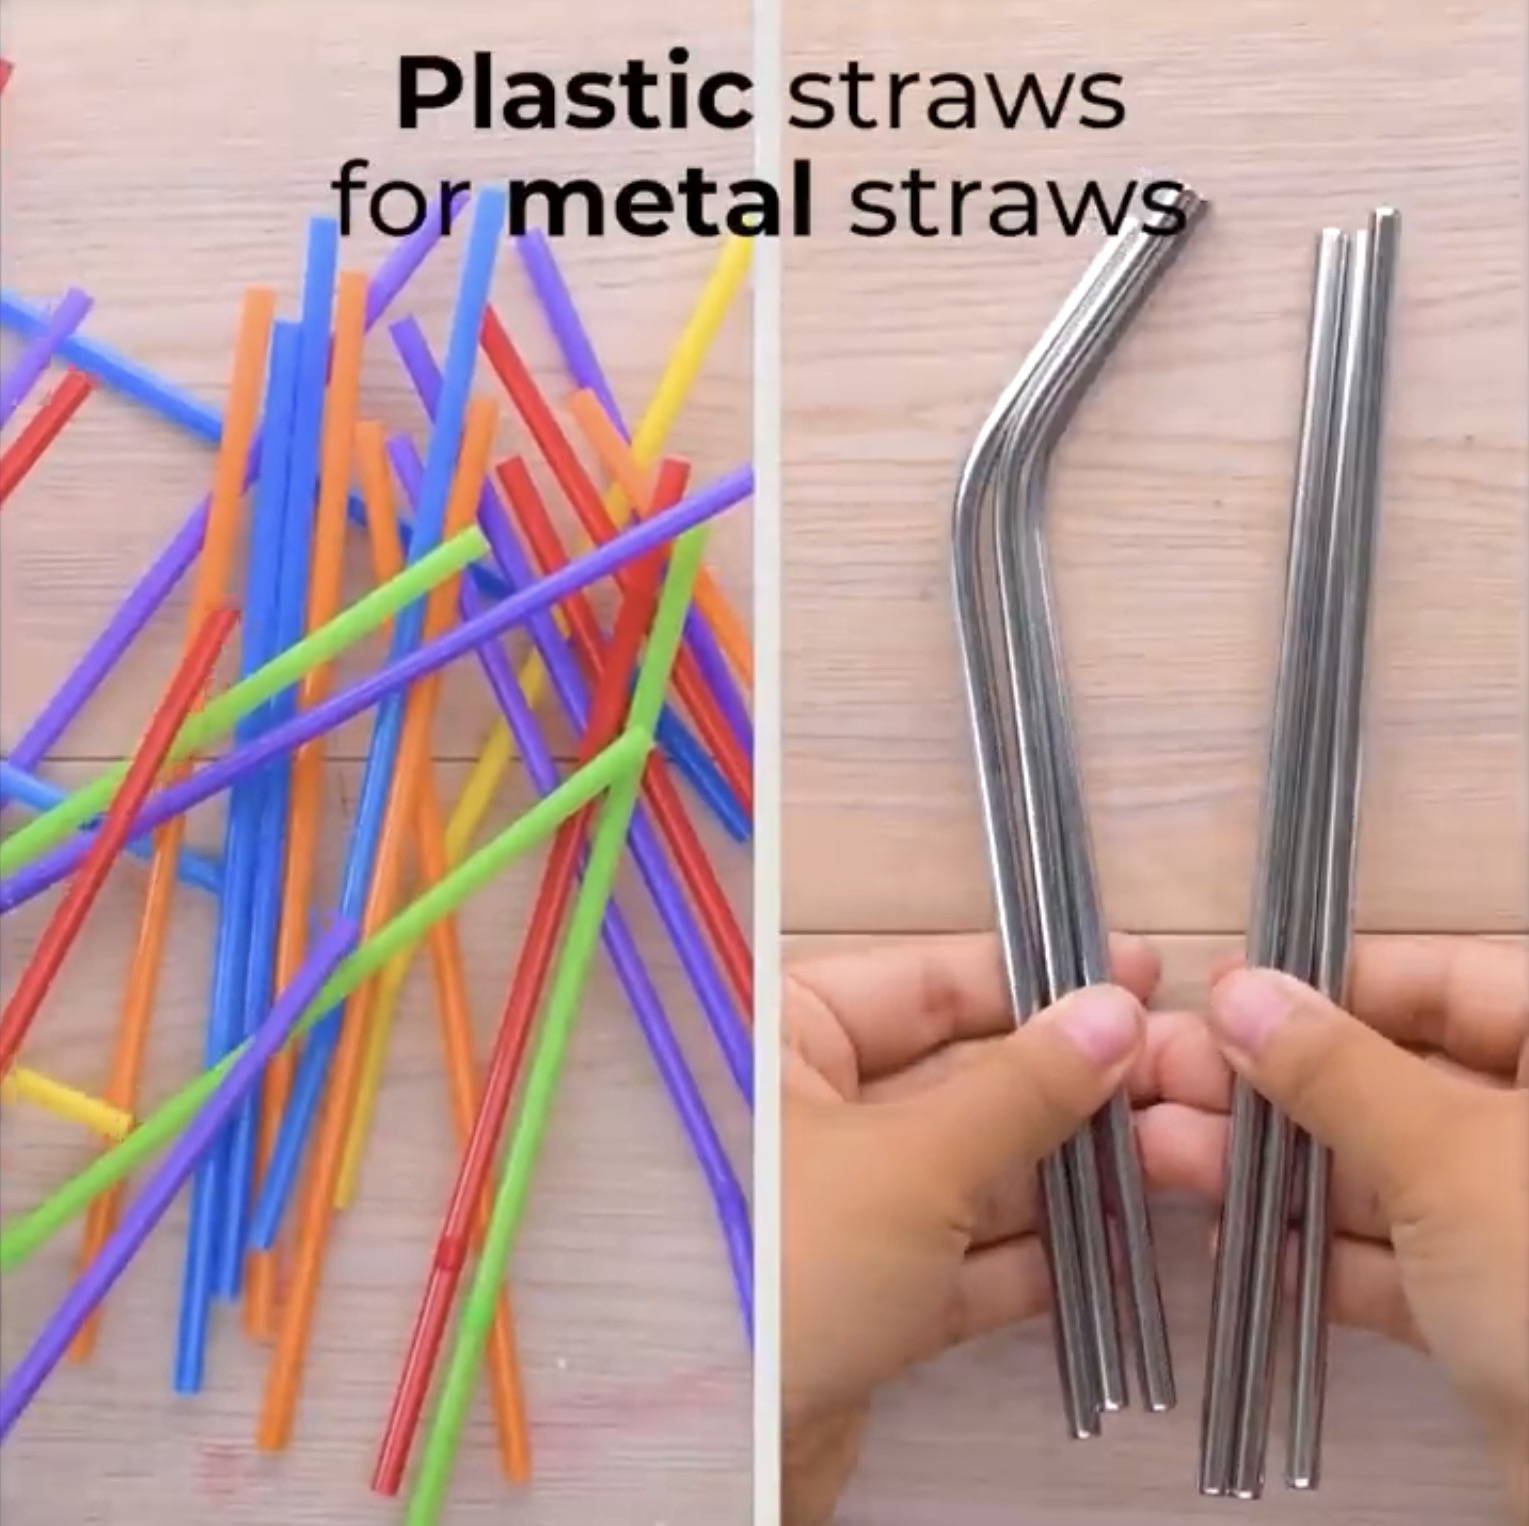 Except under fairly rare circumstances brought about by physical necessity, most of us could easily swap our reliance on plastic straws for bamboo or metal alternatives, or simply refuse plastic straws at the point of sale and sip our drinks.